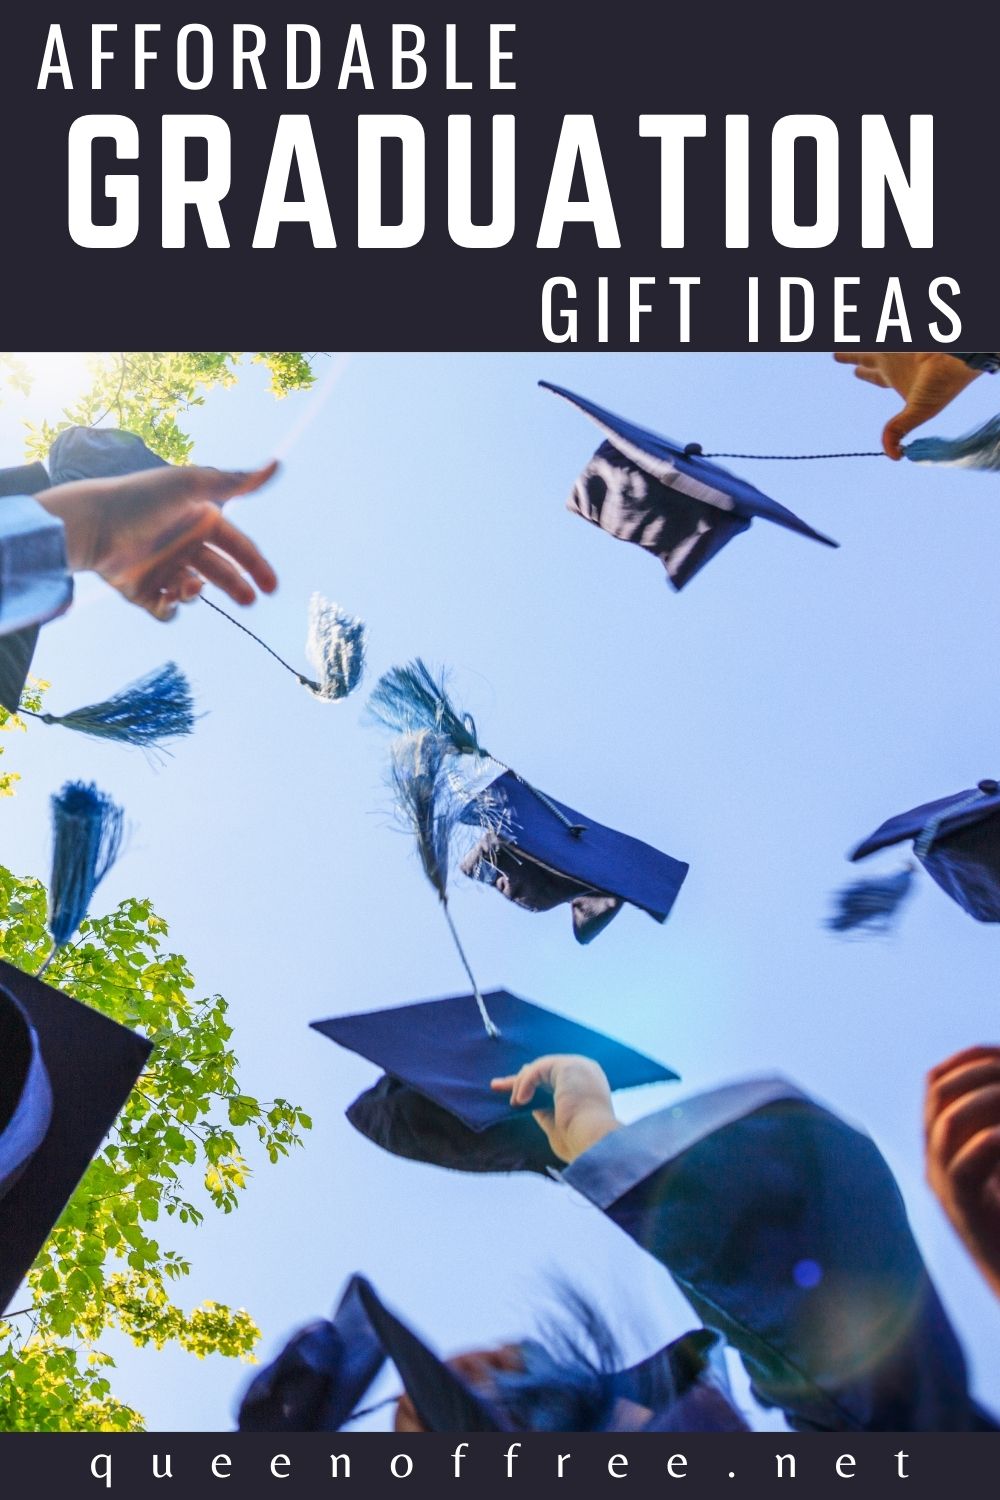 Celebrate the seniors in your life without breaking the bank. Check out these graduation gift ideas you can afford!